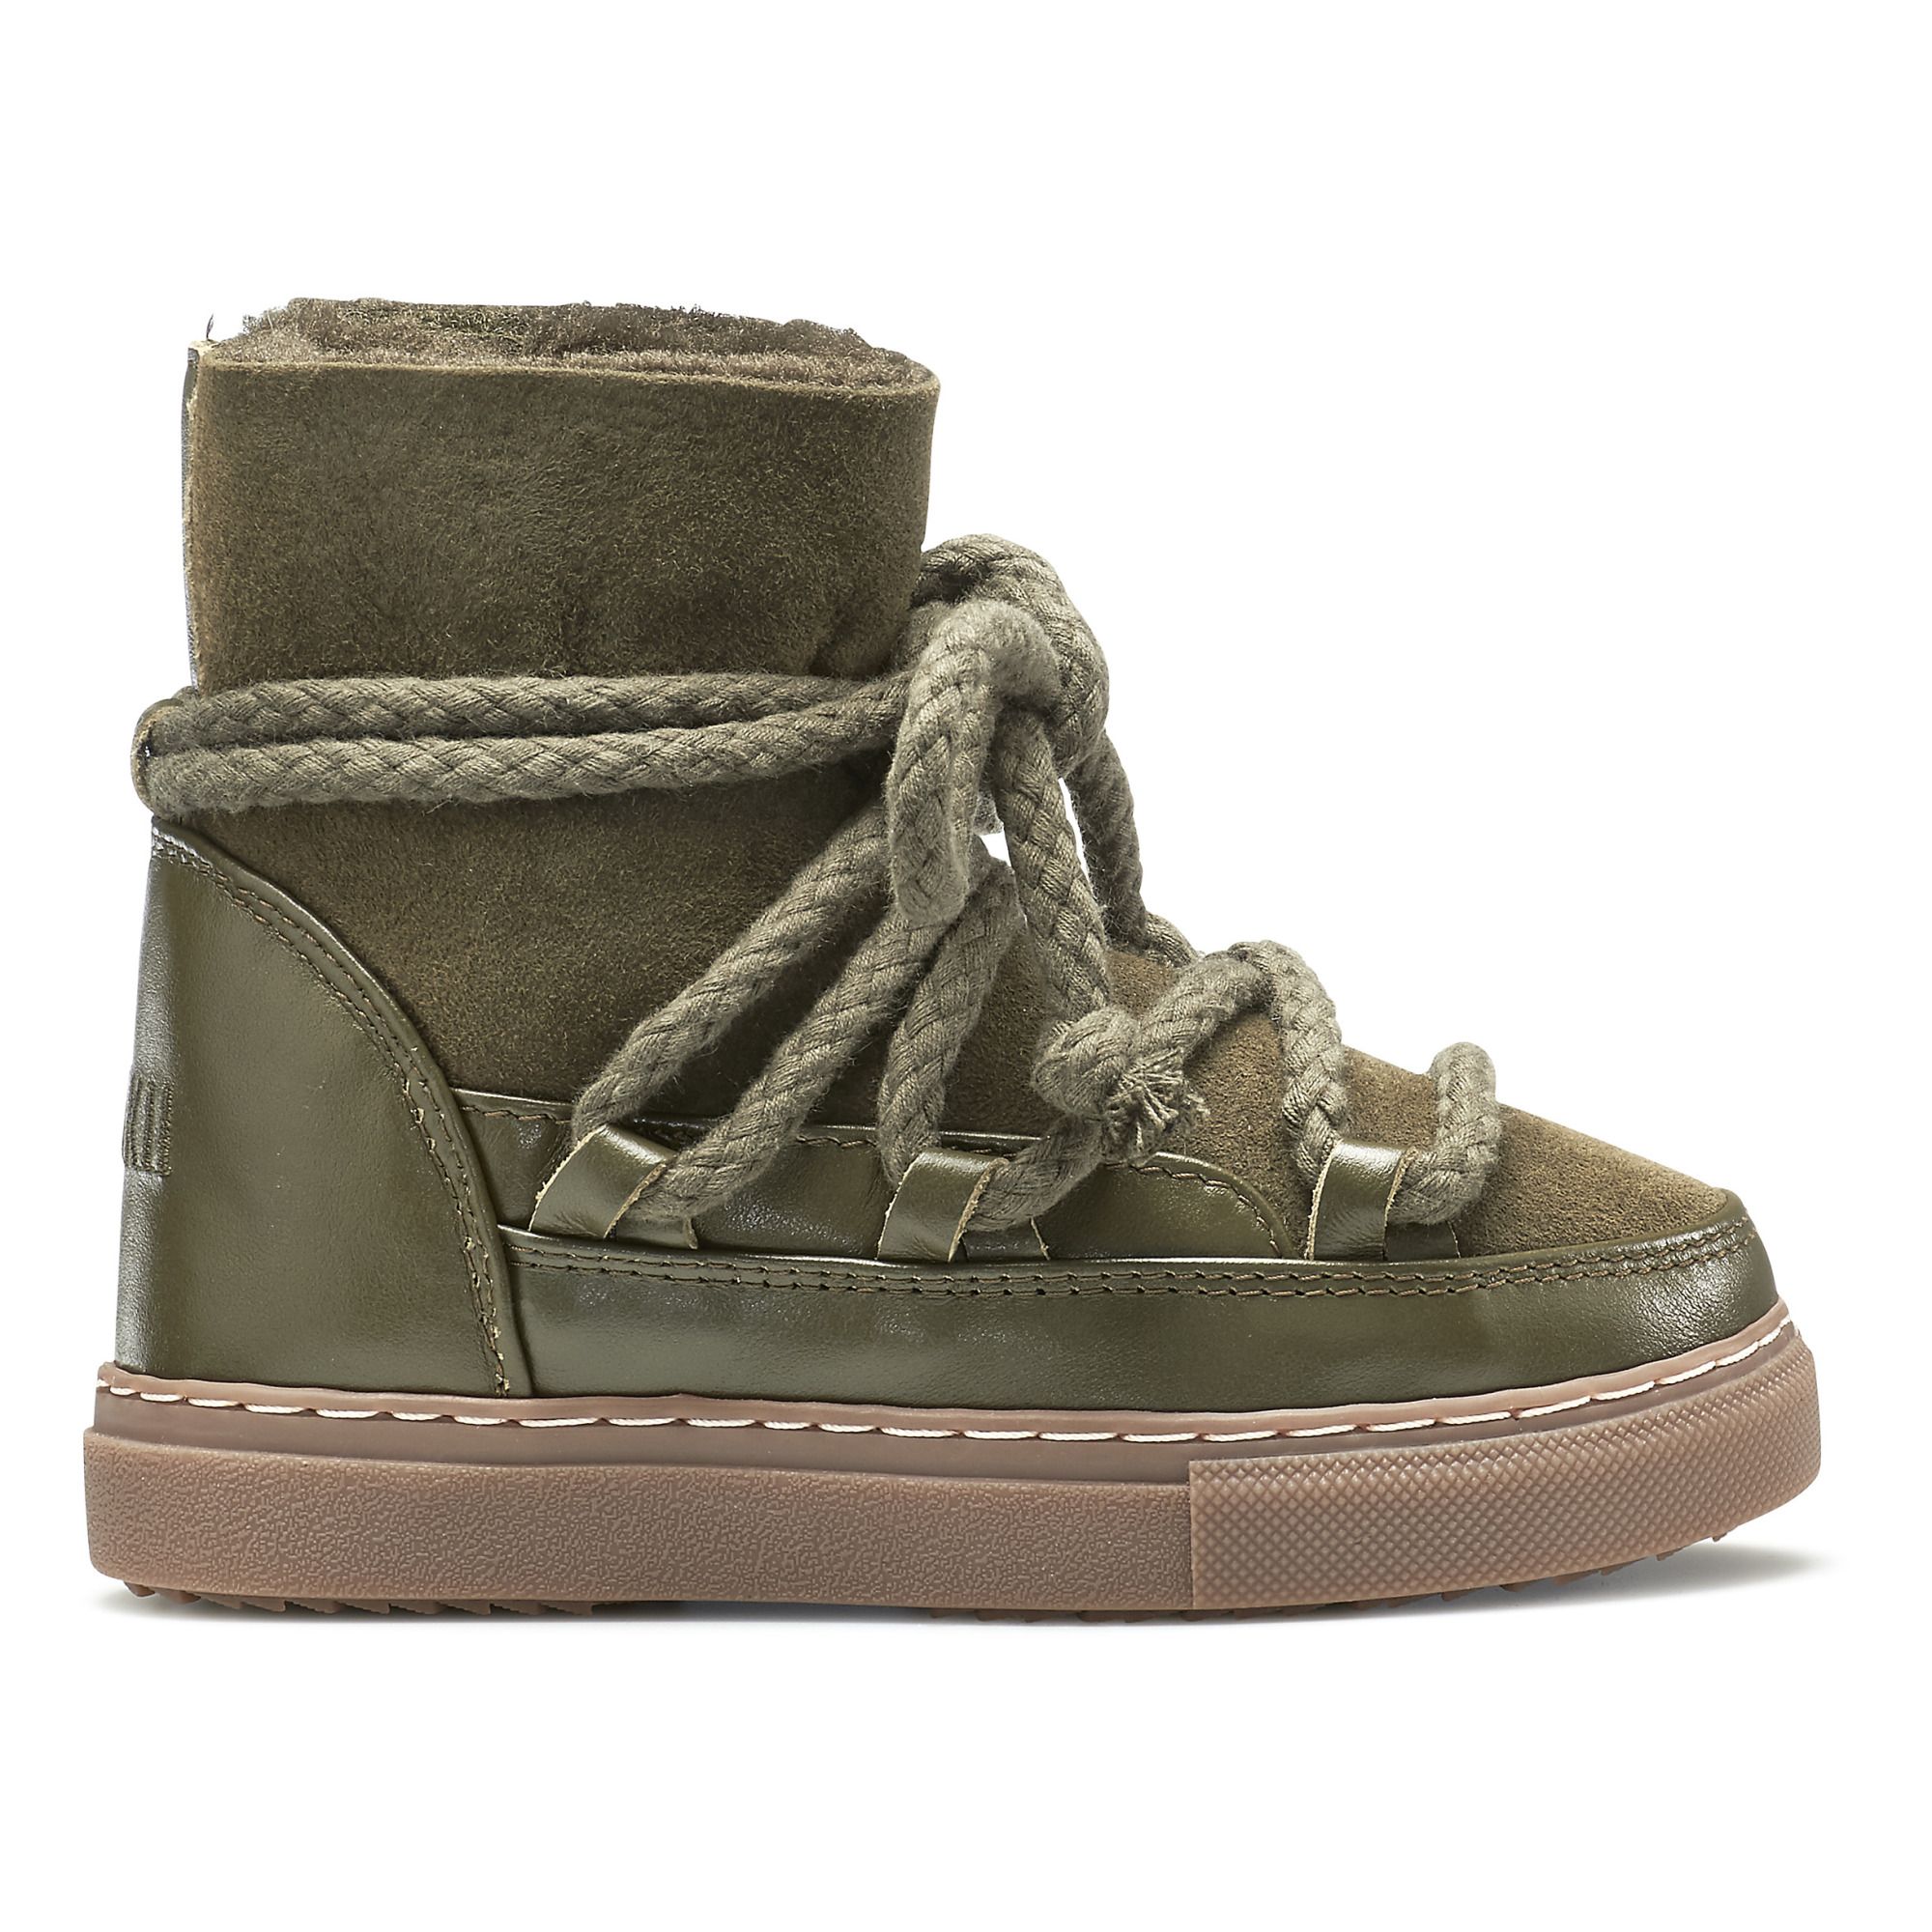 Inuikii - Sneaker Classic - Collection Enfant - - Fille - Vert olive